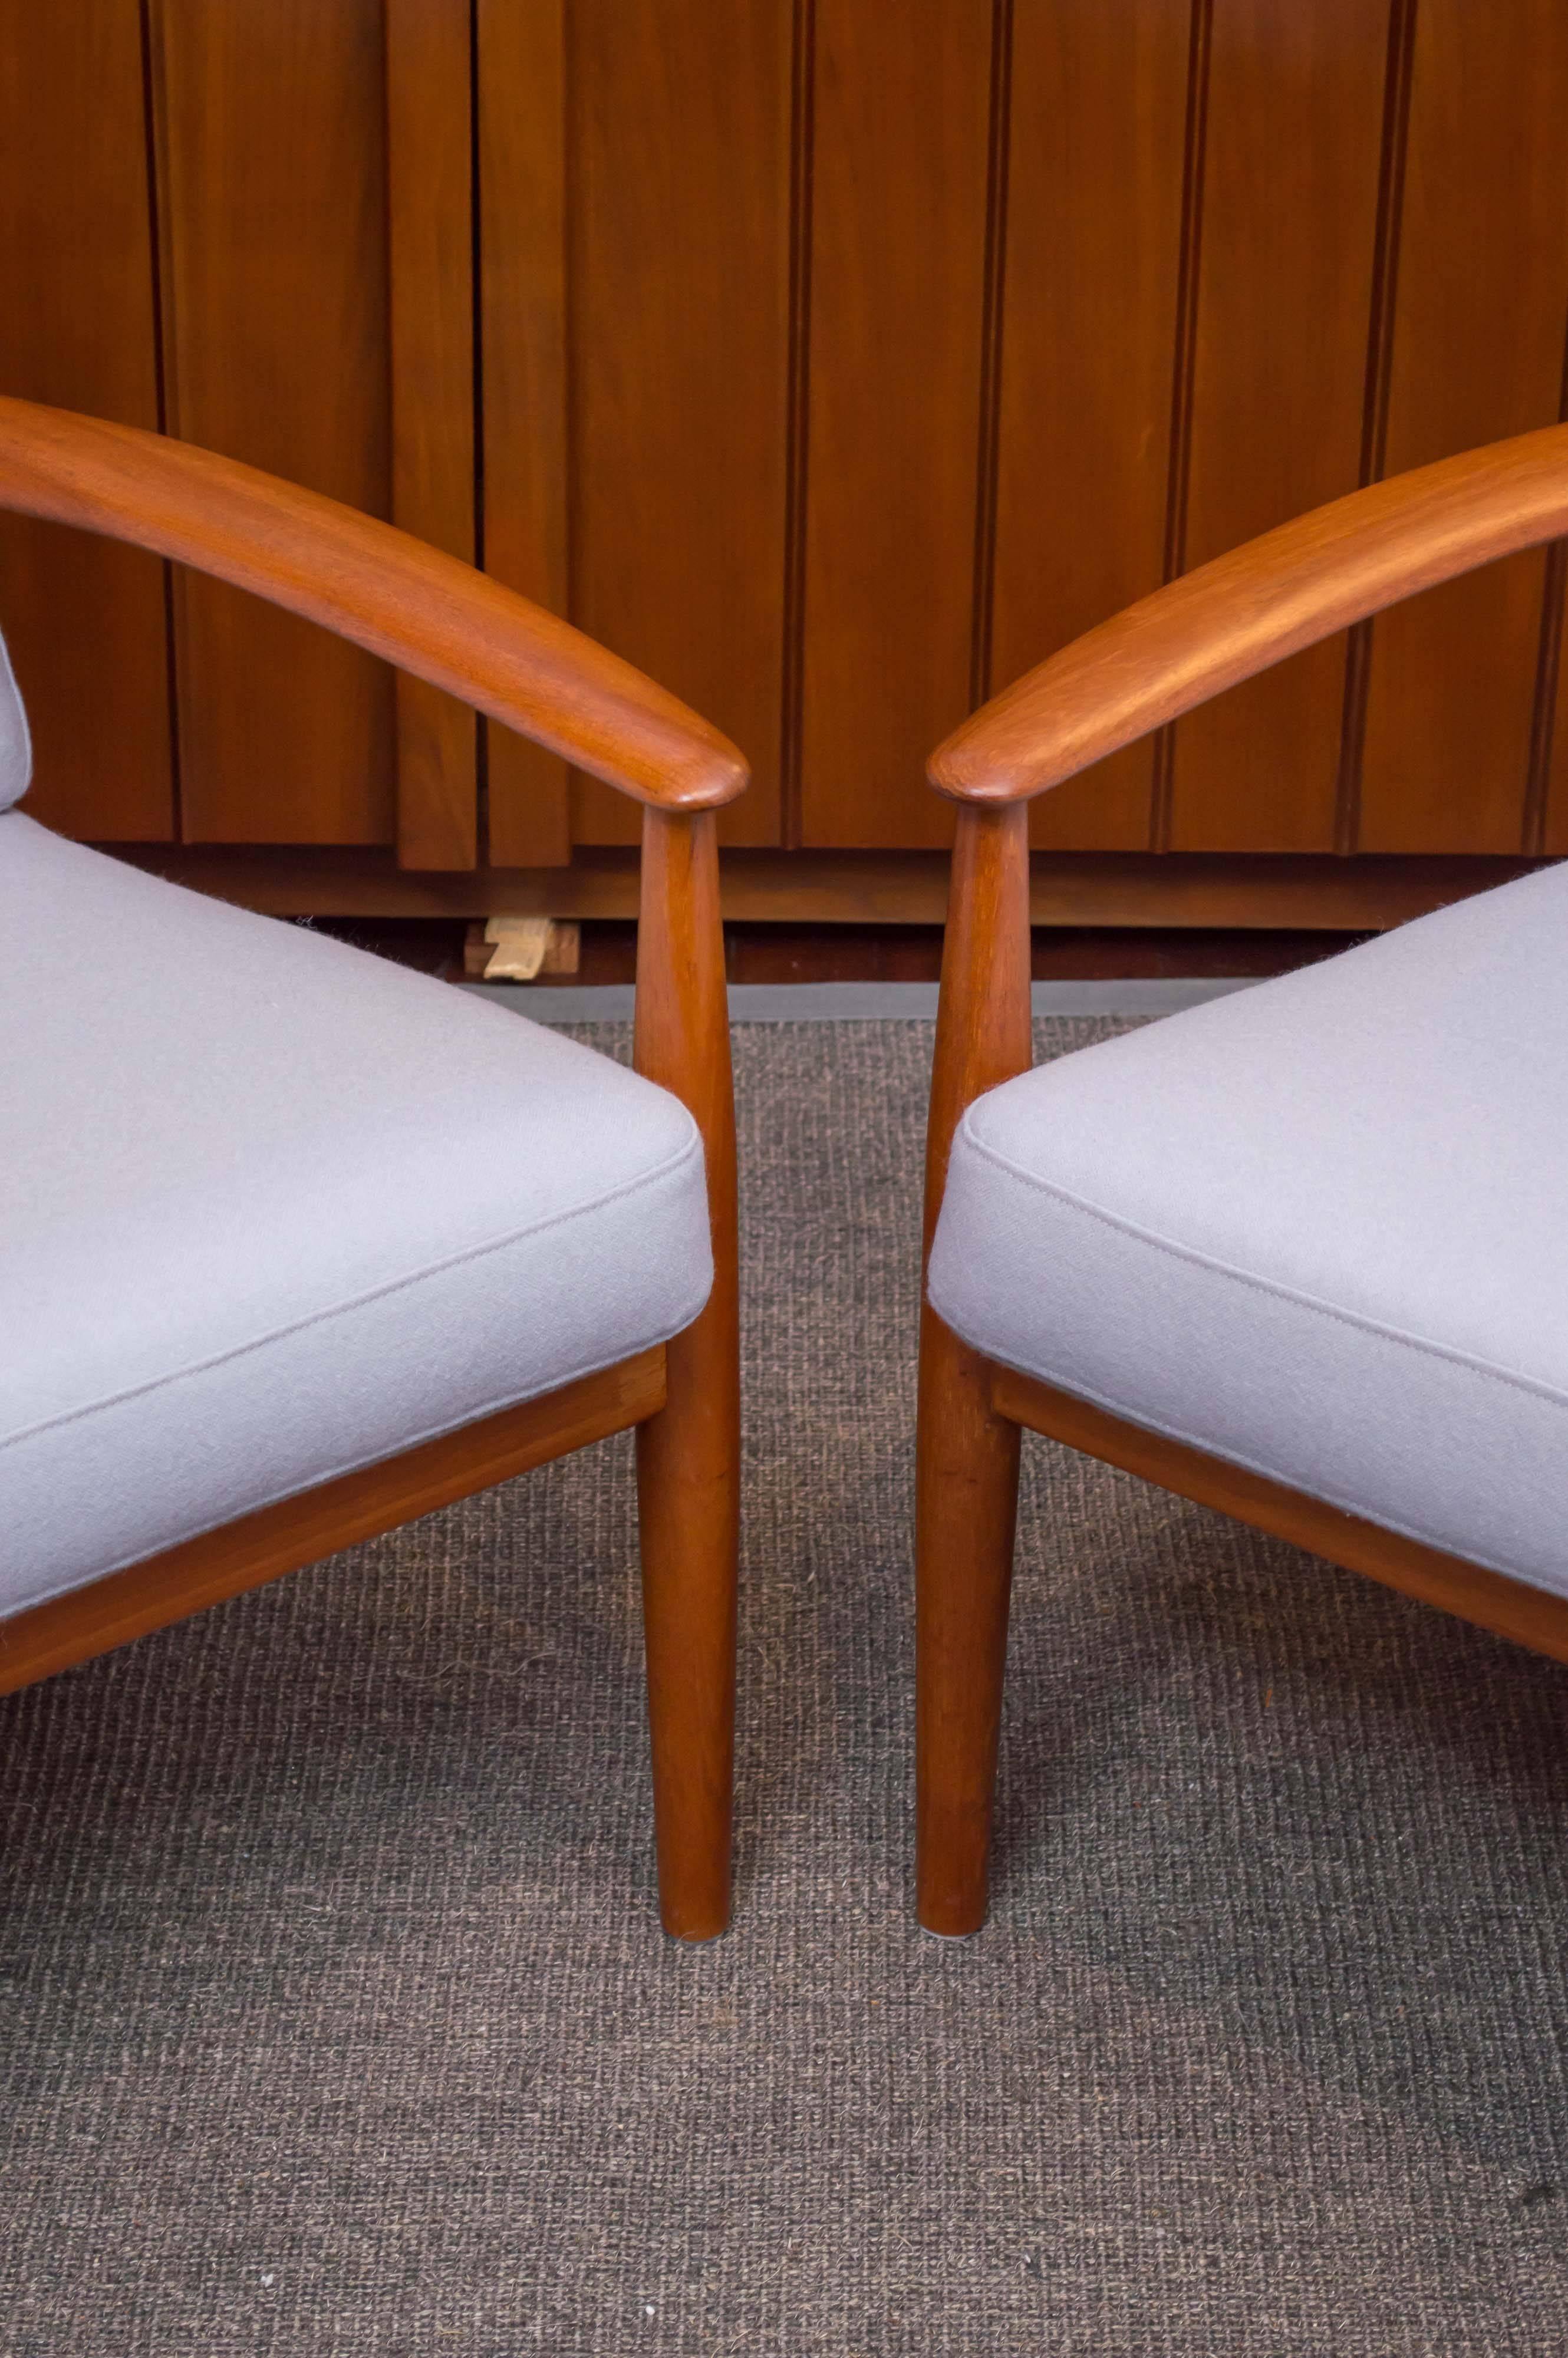 Pair of Greta Jalk design teak armchairs for France & Son, imported by Jon Stuart.
Great scale, roomy and comfortable lounge chairs. Perfectly refinished and newly upholstered.